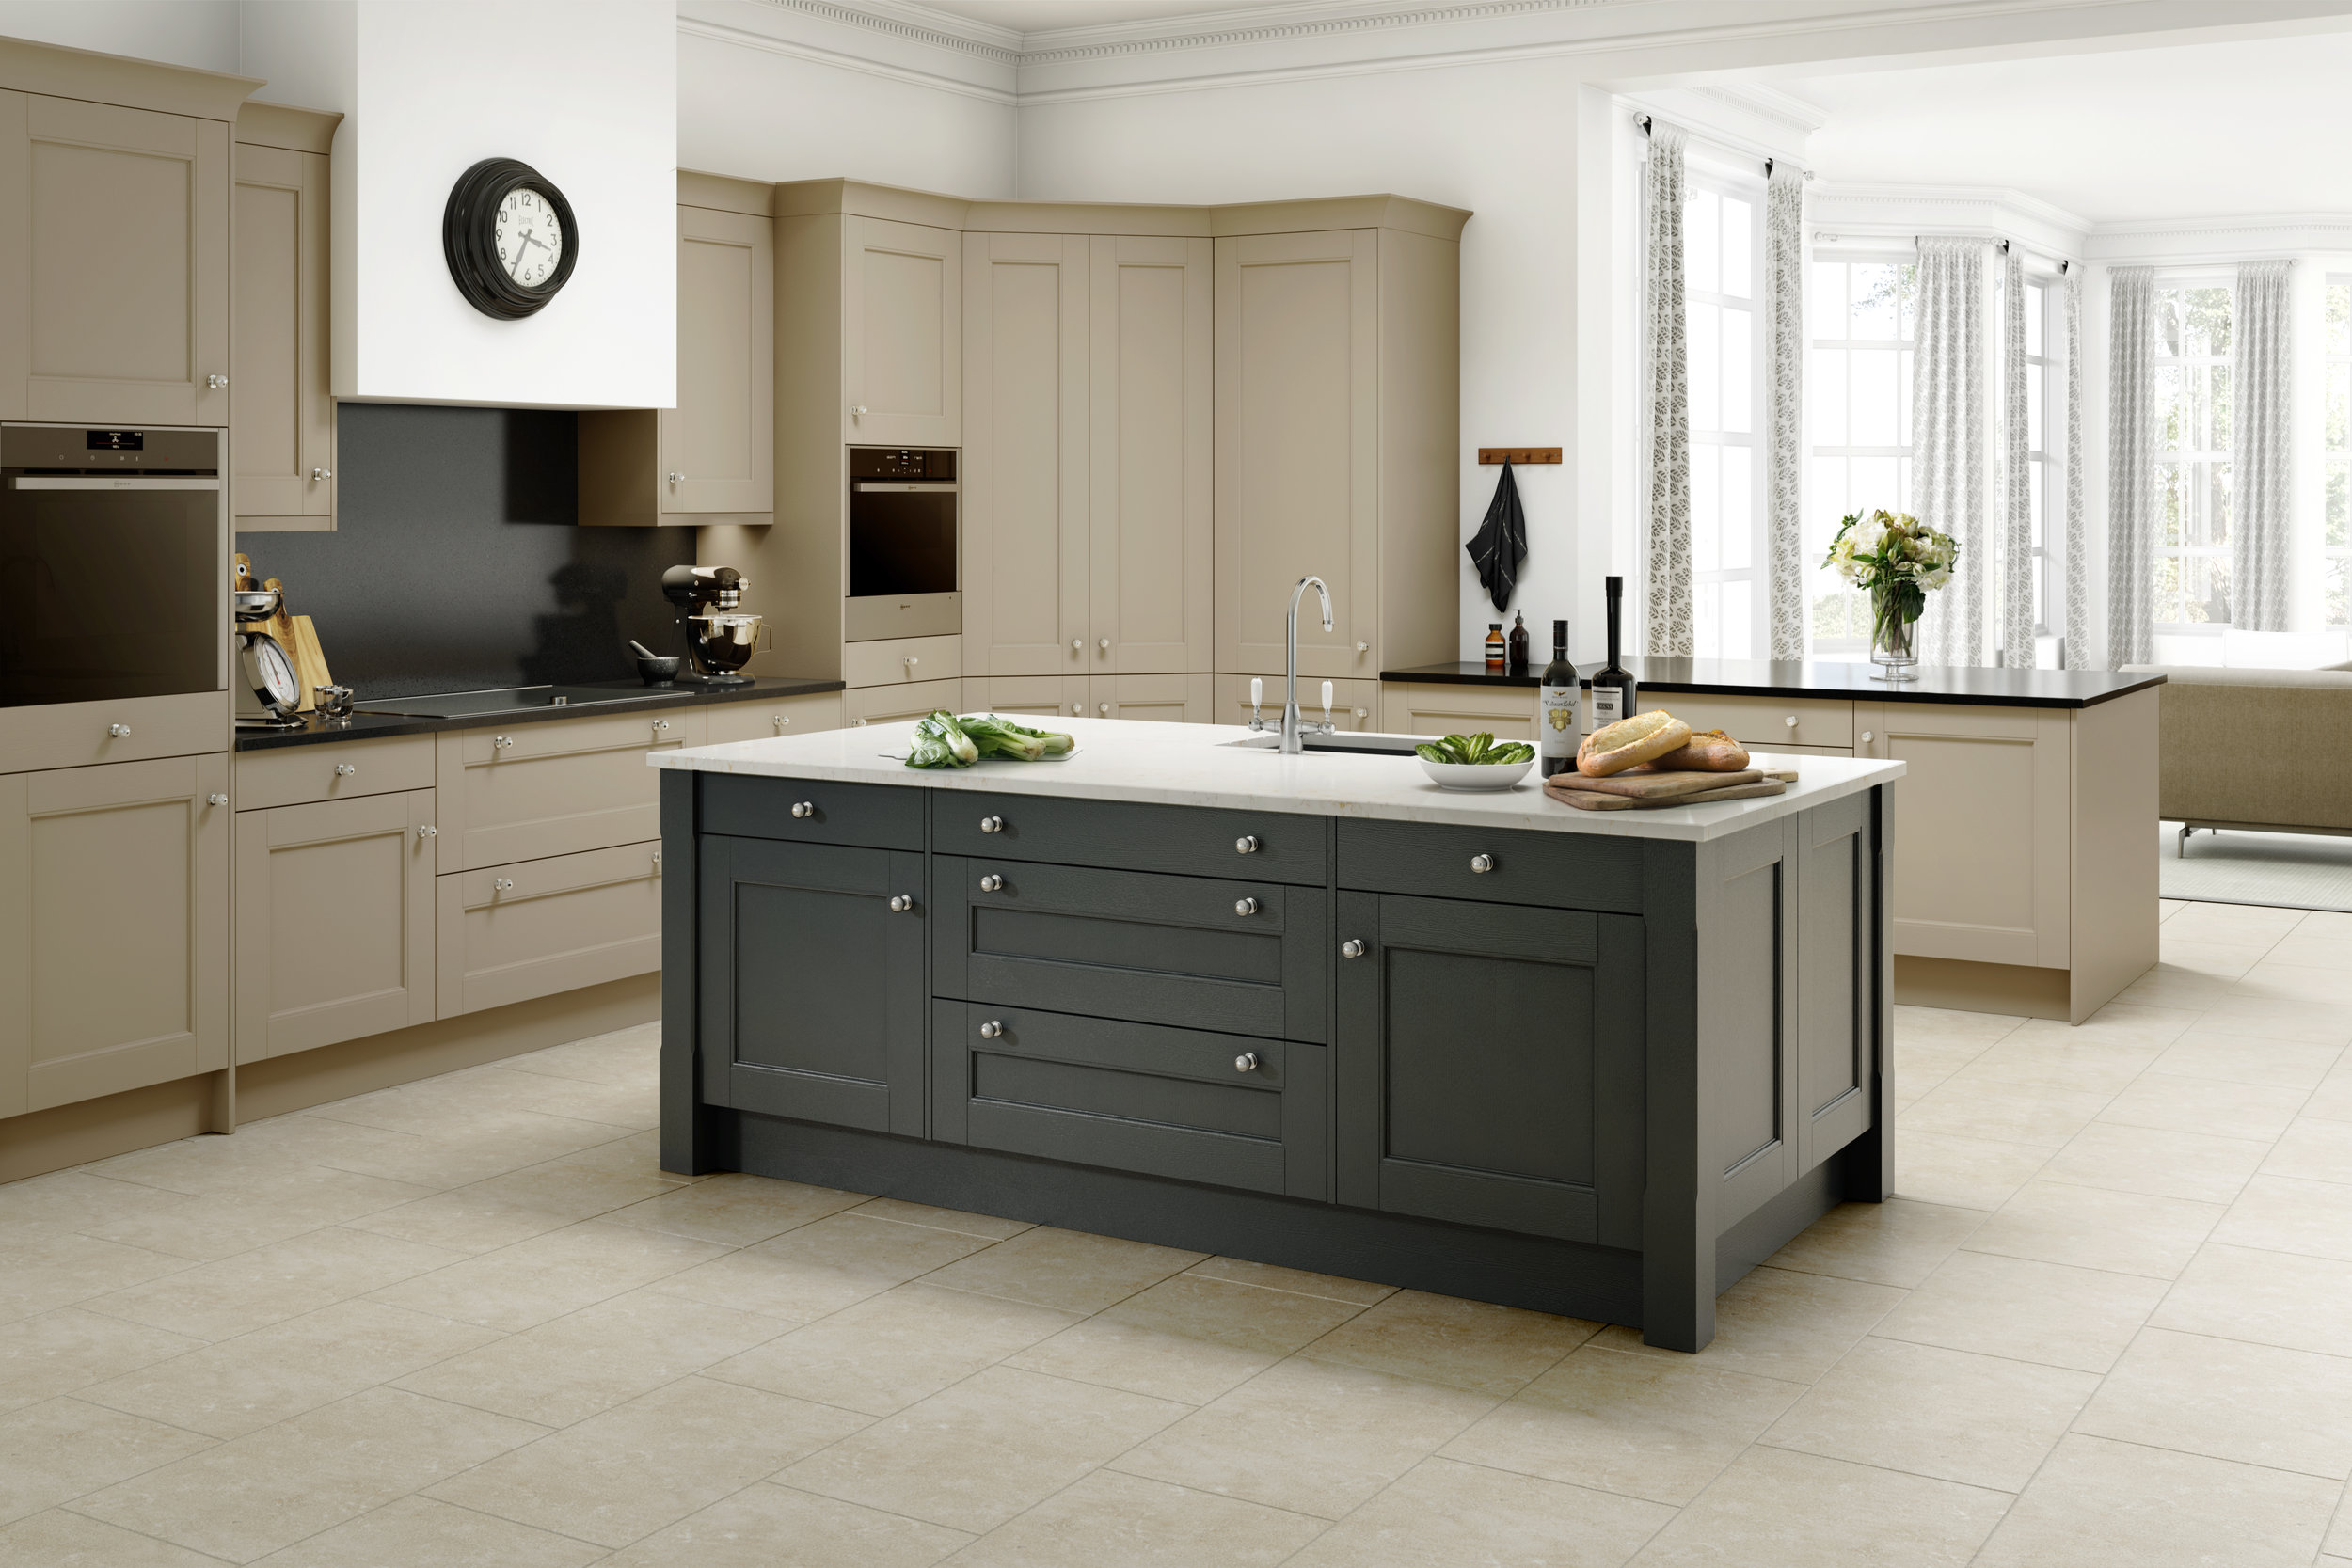 Manor House Shaker Sandstone and Anthracite.jpg